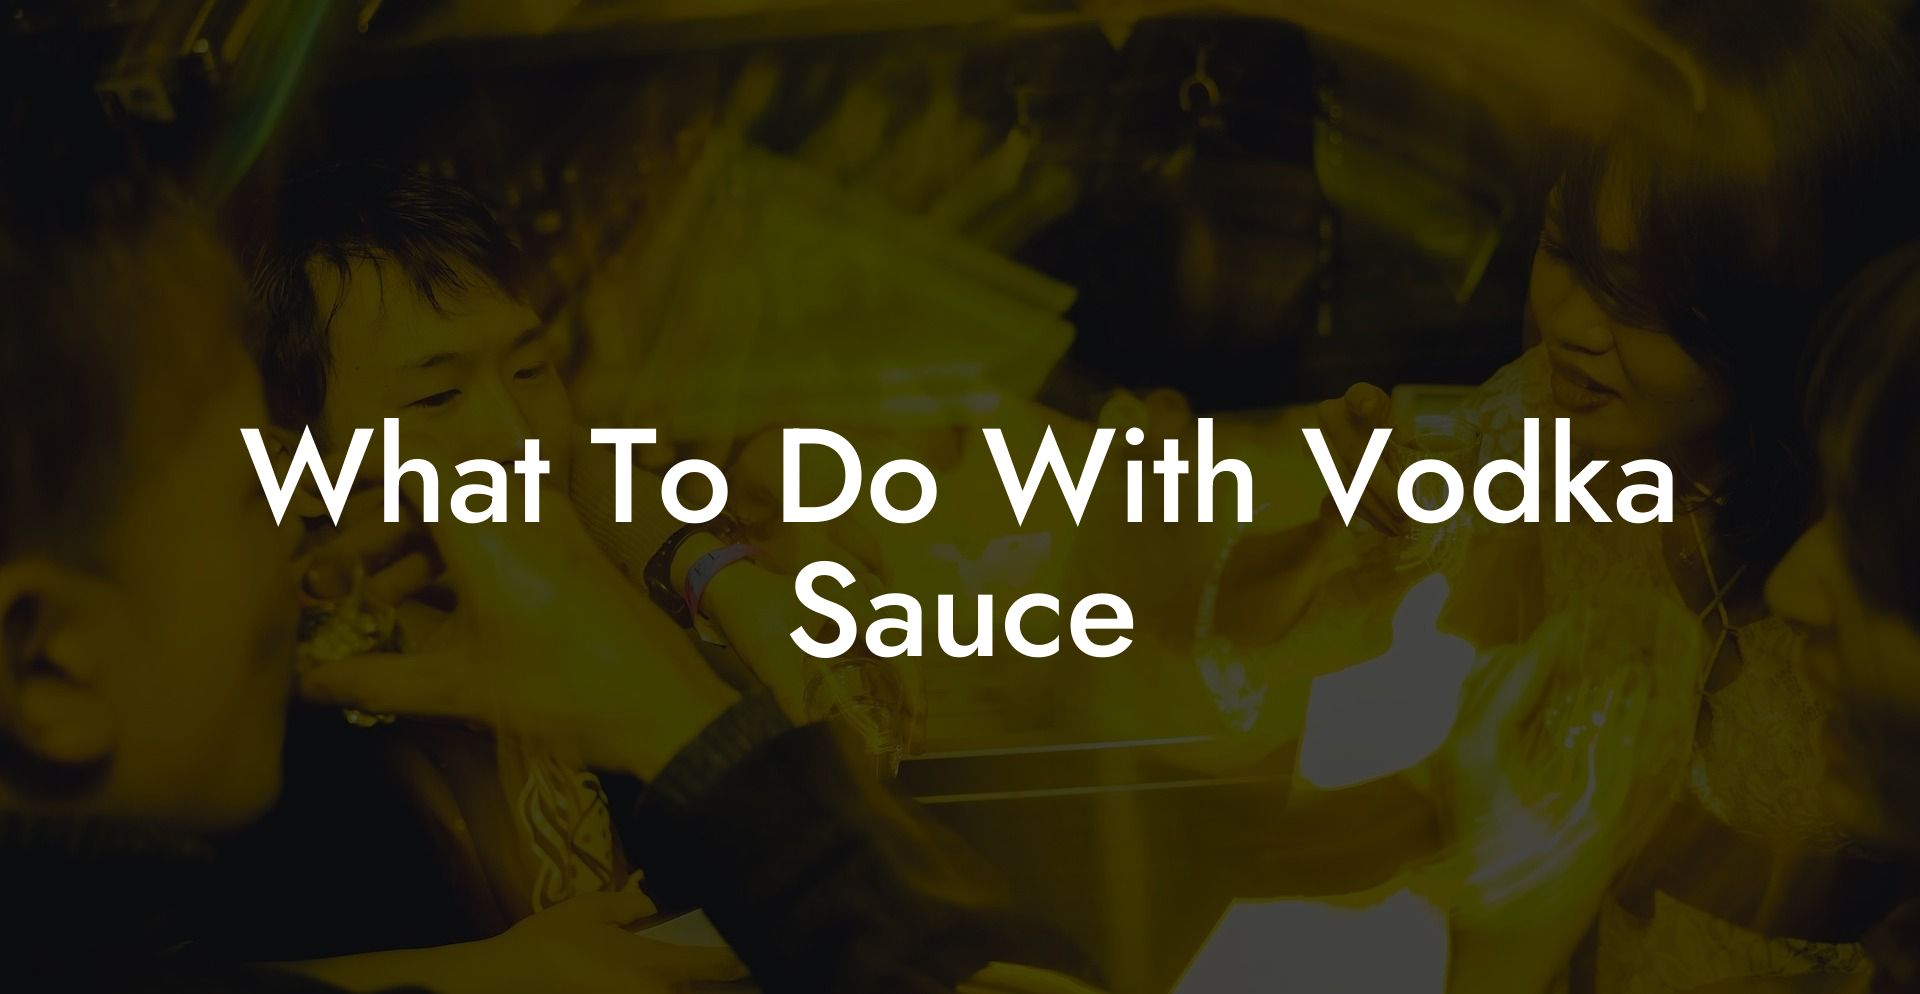 What To Do With Vodka Sauce